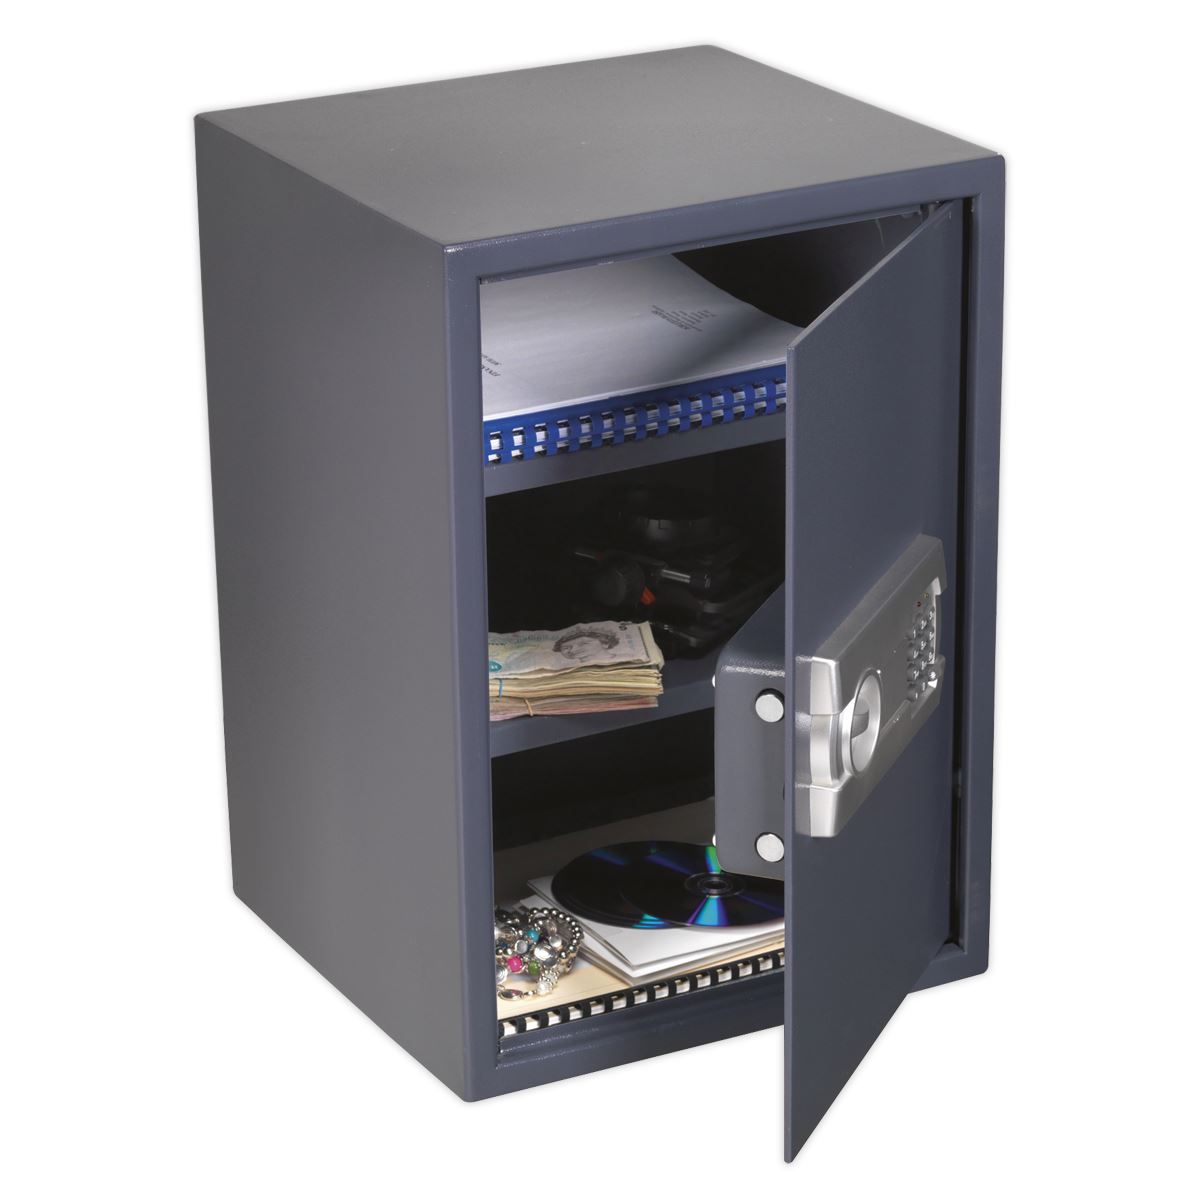 Sealey Electronic Combination Security Safe 350 x 330 x 500mm